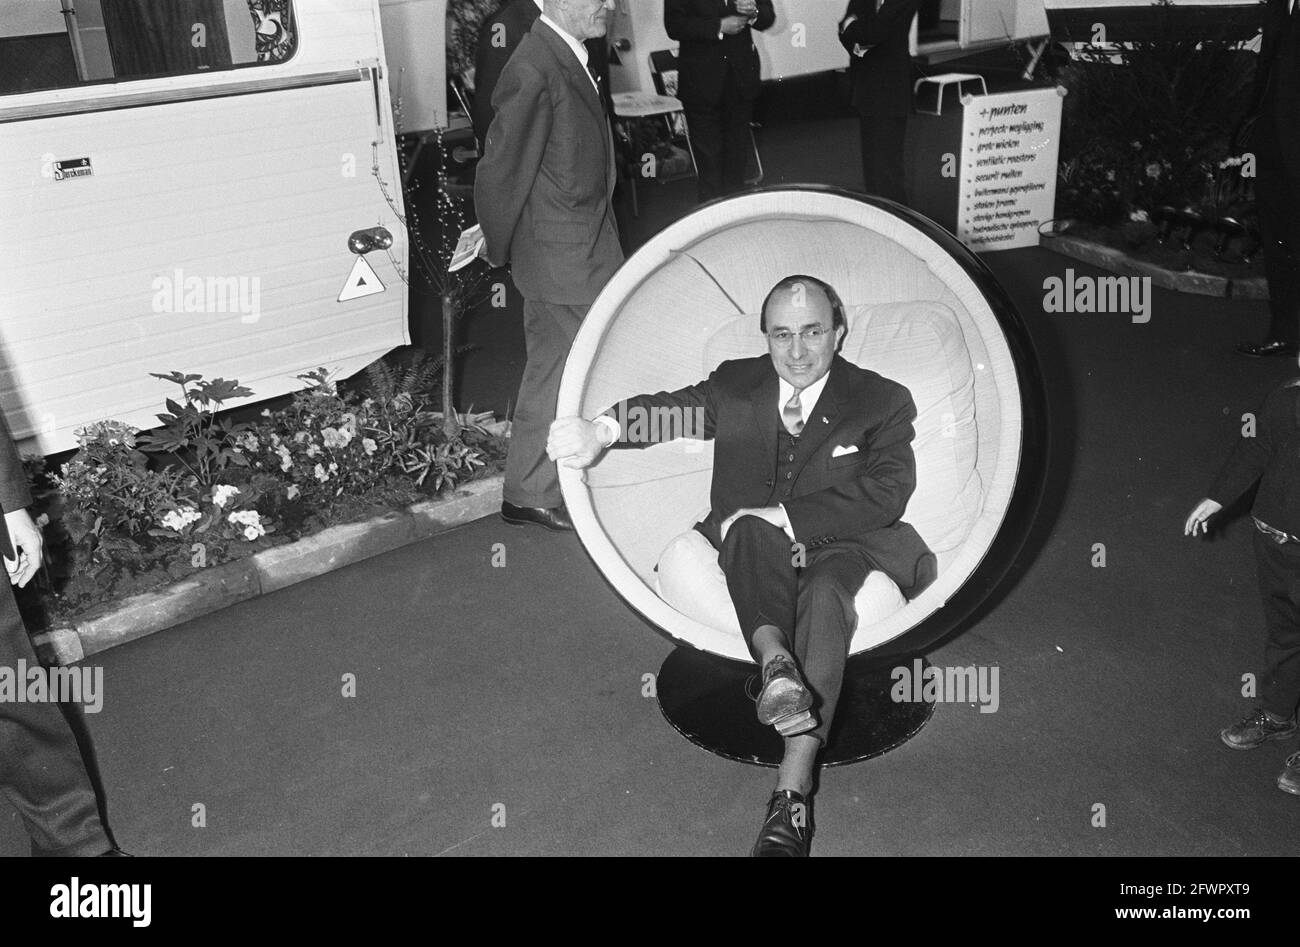 Mr. J. Cals opened caravan exhibition, former prime minister Cals in a chair, January 27, 1967, caravans, chairs, exhibitions, The Netherlands, 20th century press agency photo, news to remember, documentary, historic photography 1945-1990, visual stories, human history of the Twentieth Century, capturing moments in time Stock Photo